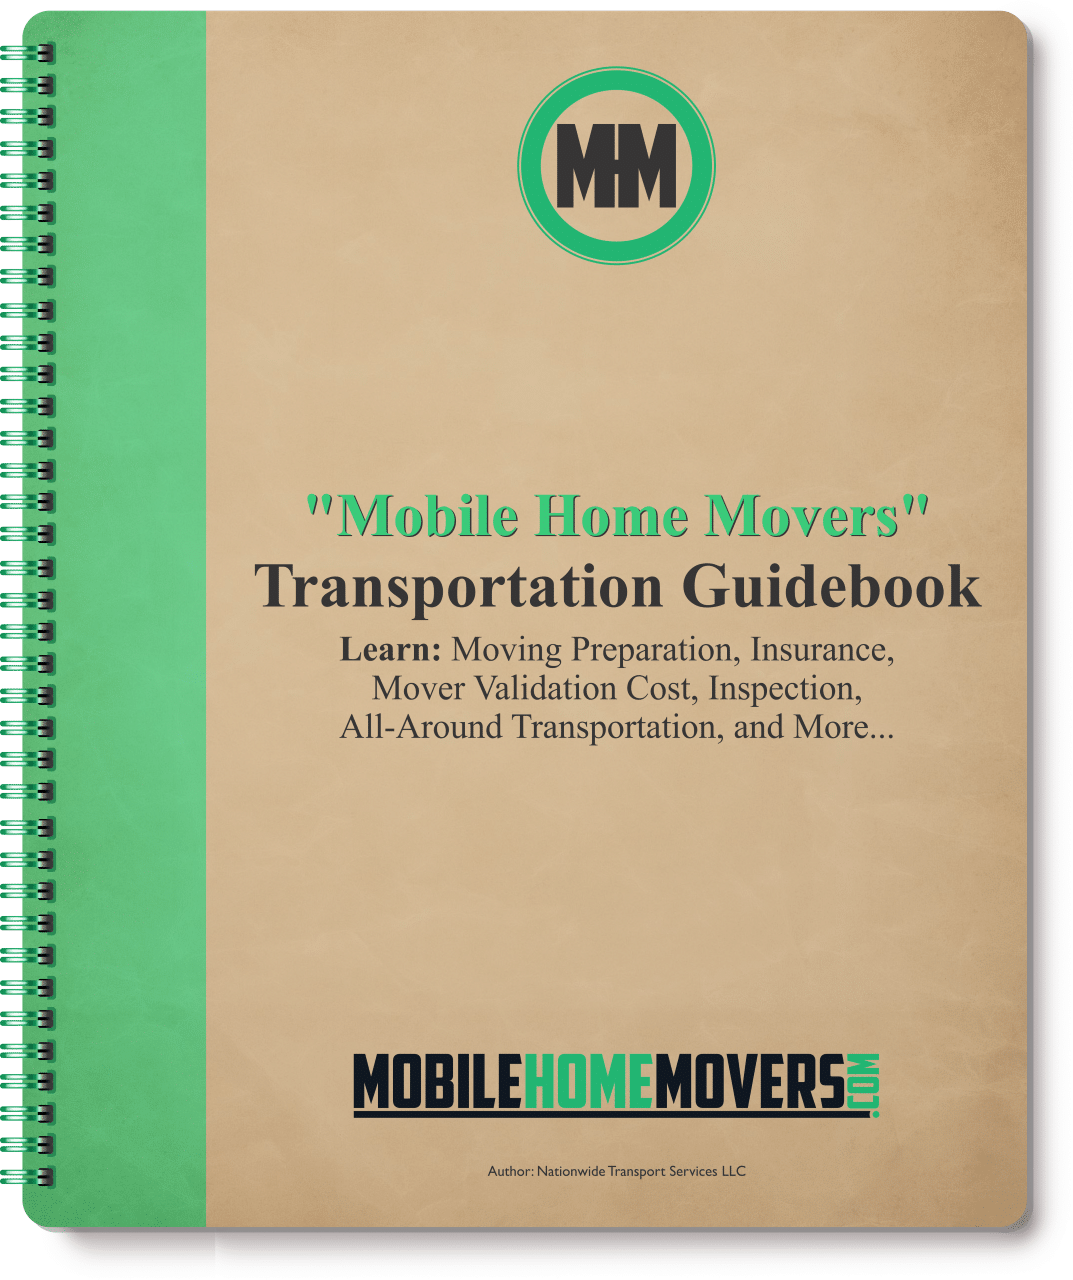 Mobile Home Movers eBook 